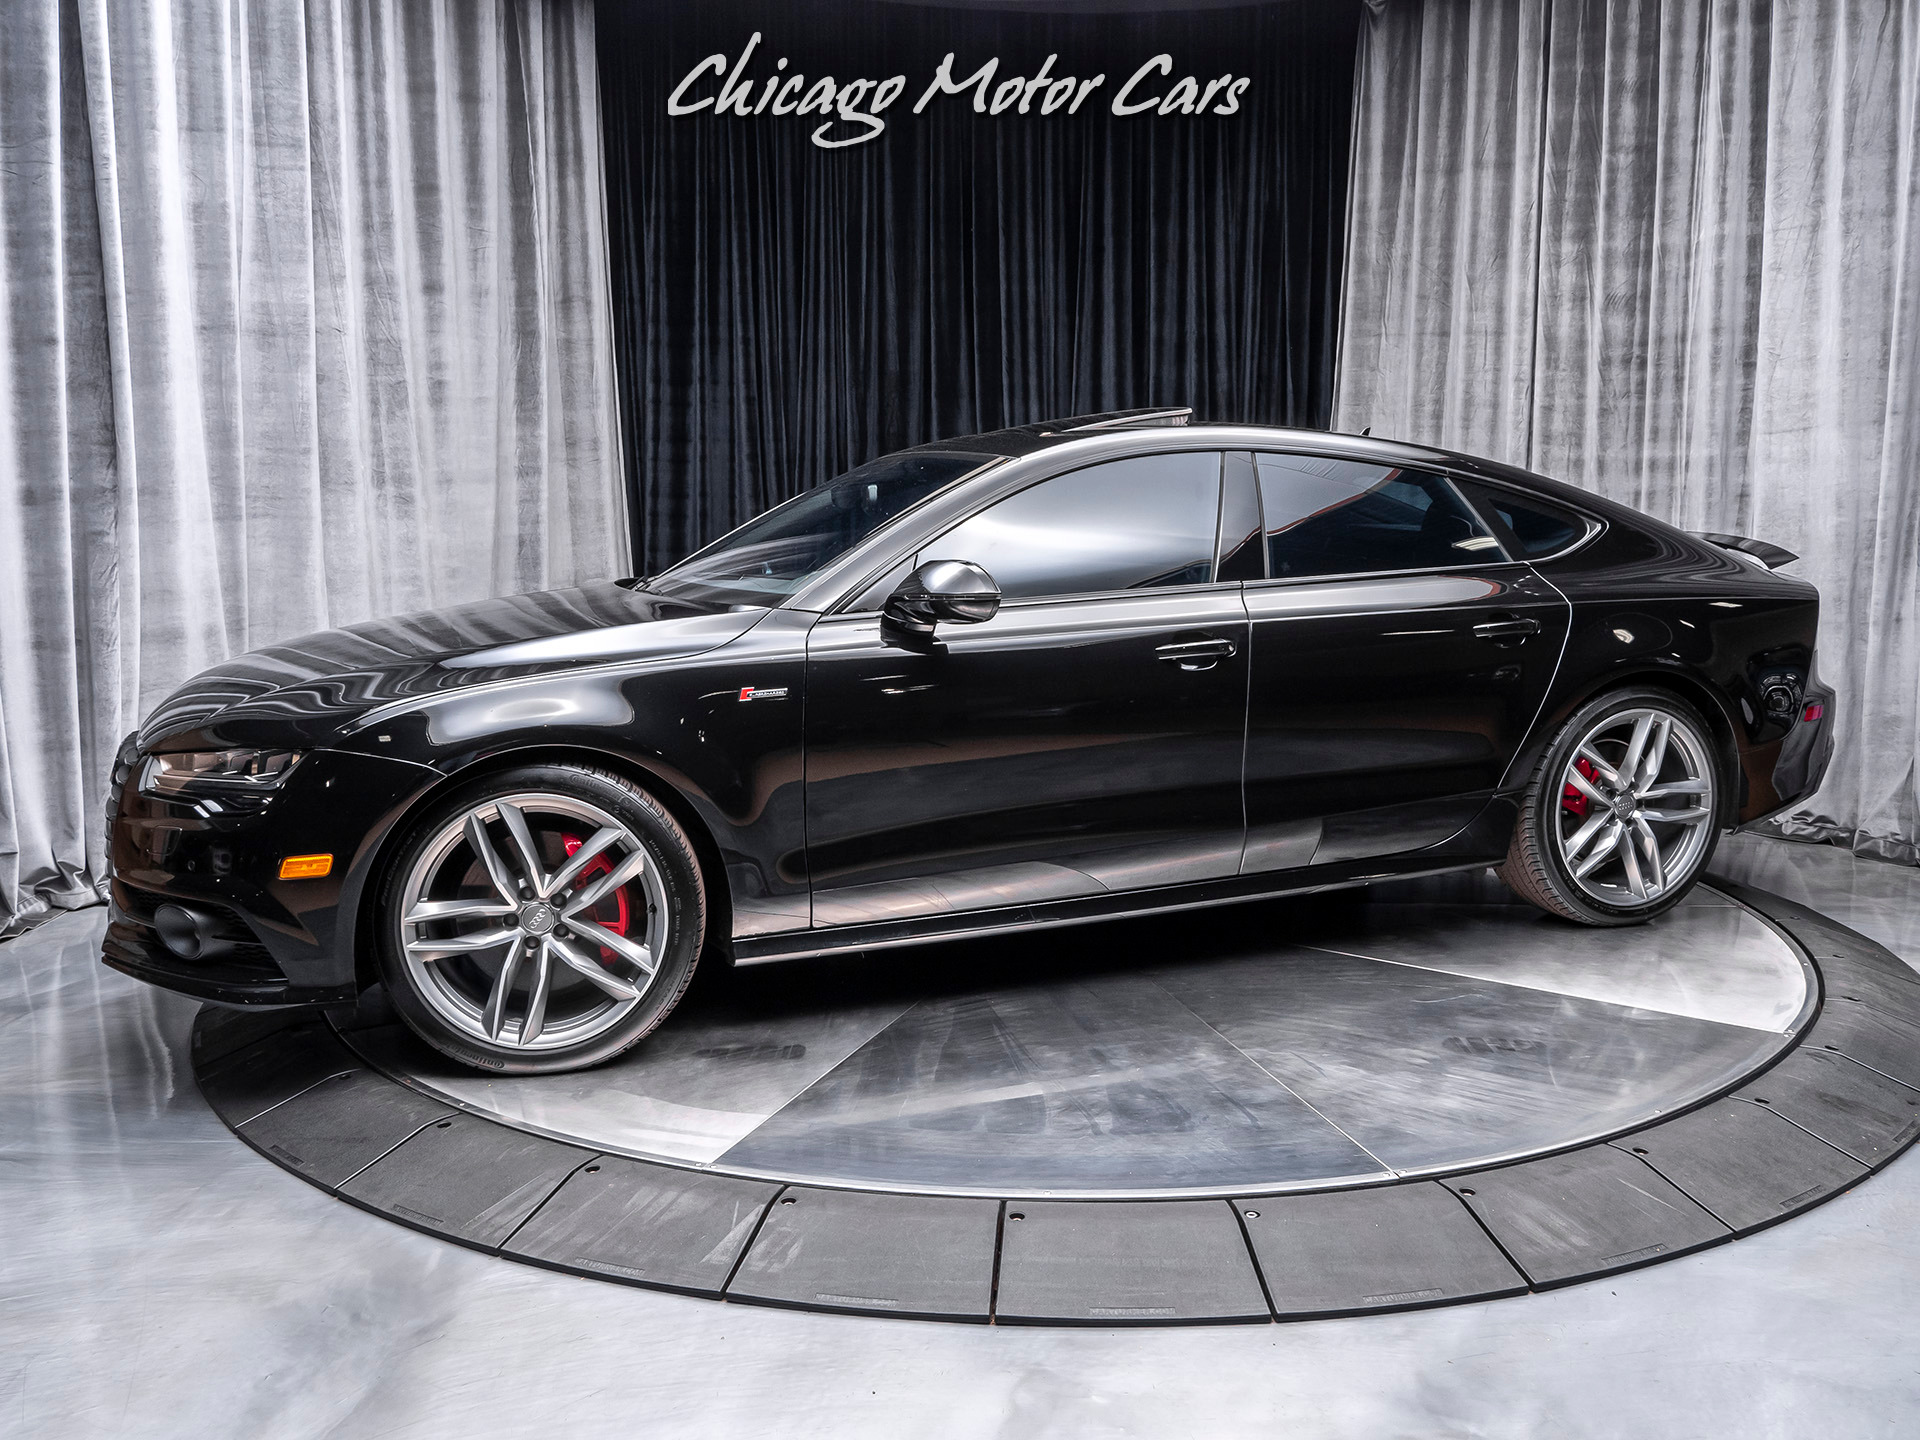 Used 2018 Audi A7 Premium Plus Quattro Hatchback MSRP $76,810+ COMPETITION  PACKAGE! For Sale (Special Pricing) | Chicago Motor Cars Stock #15986